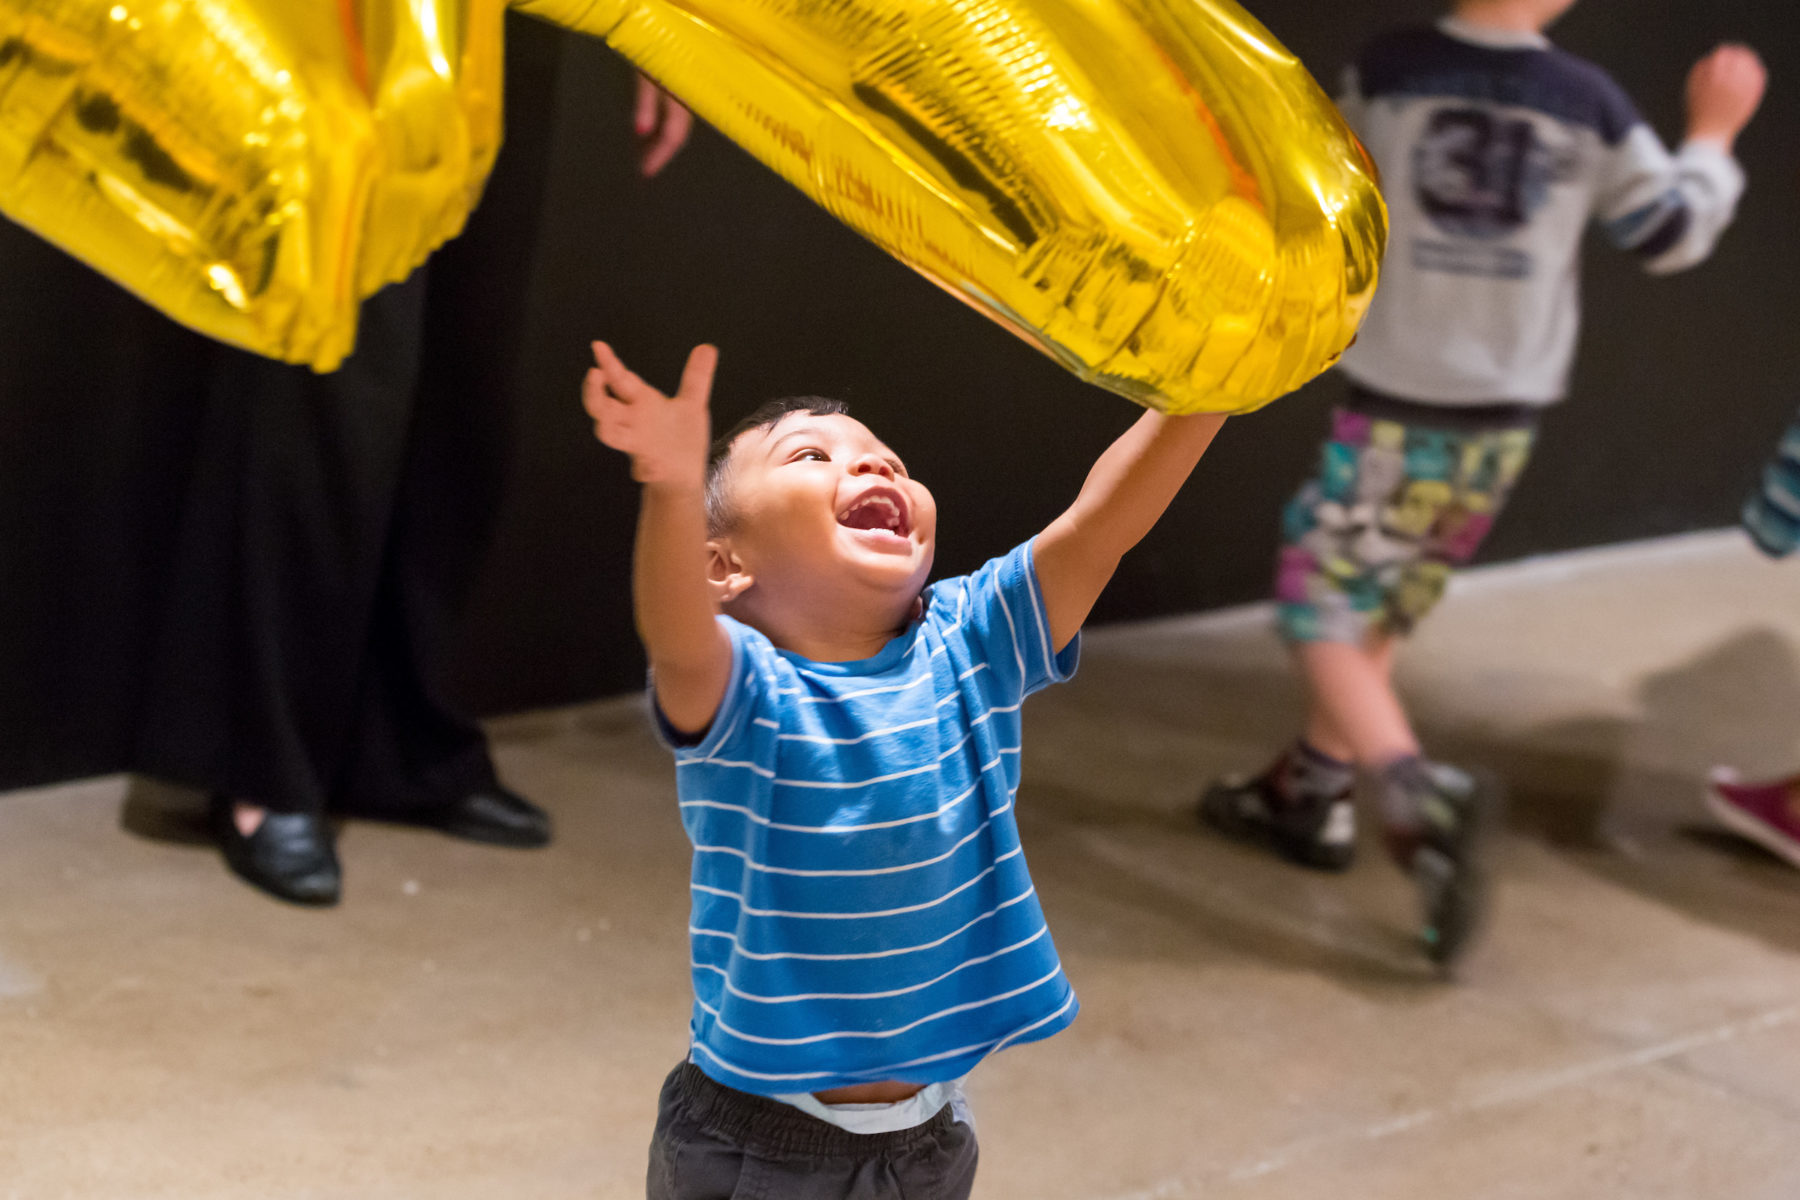 A smiling child throws a gold balloon up in the air in a gallery